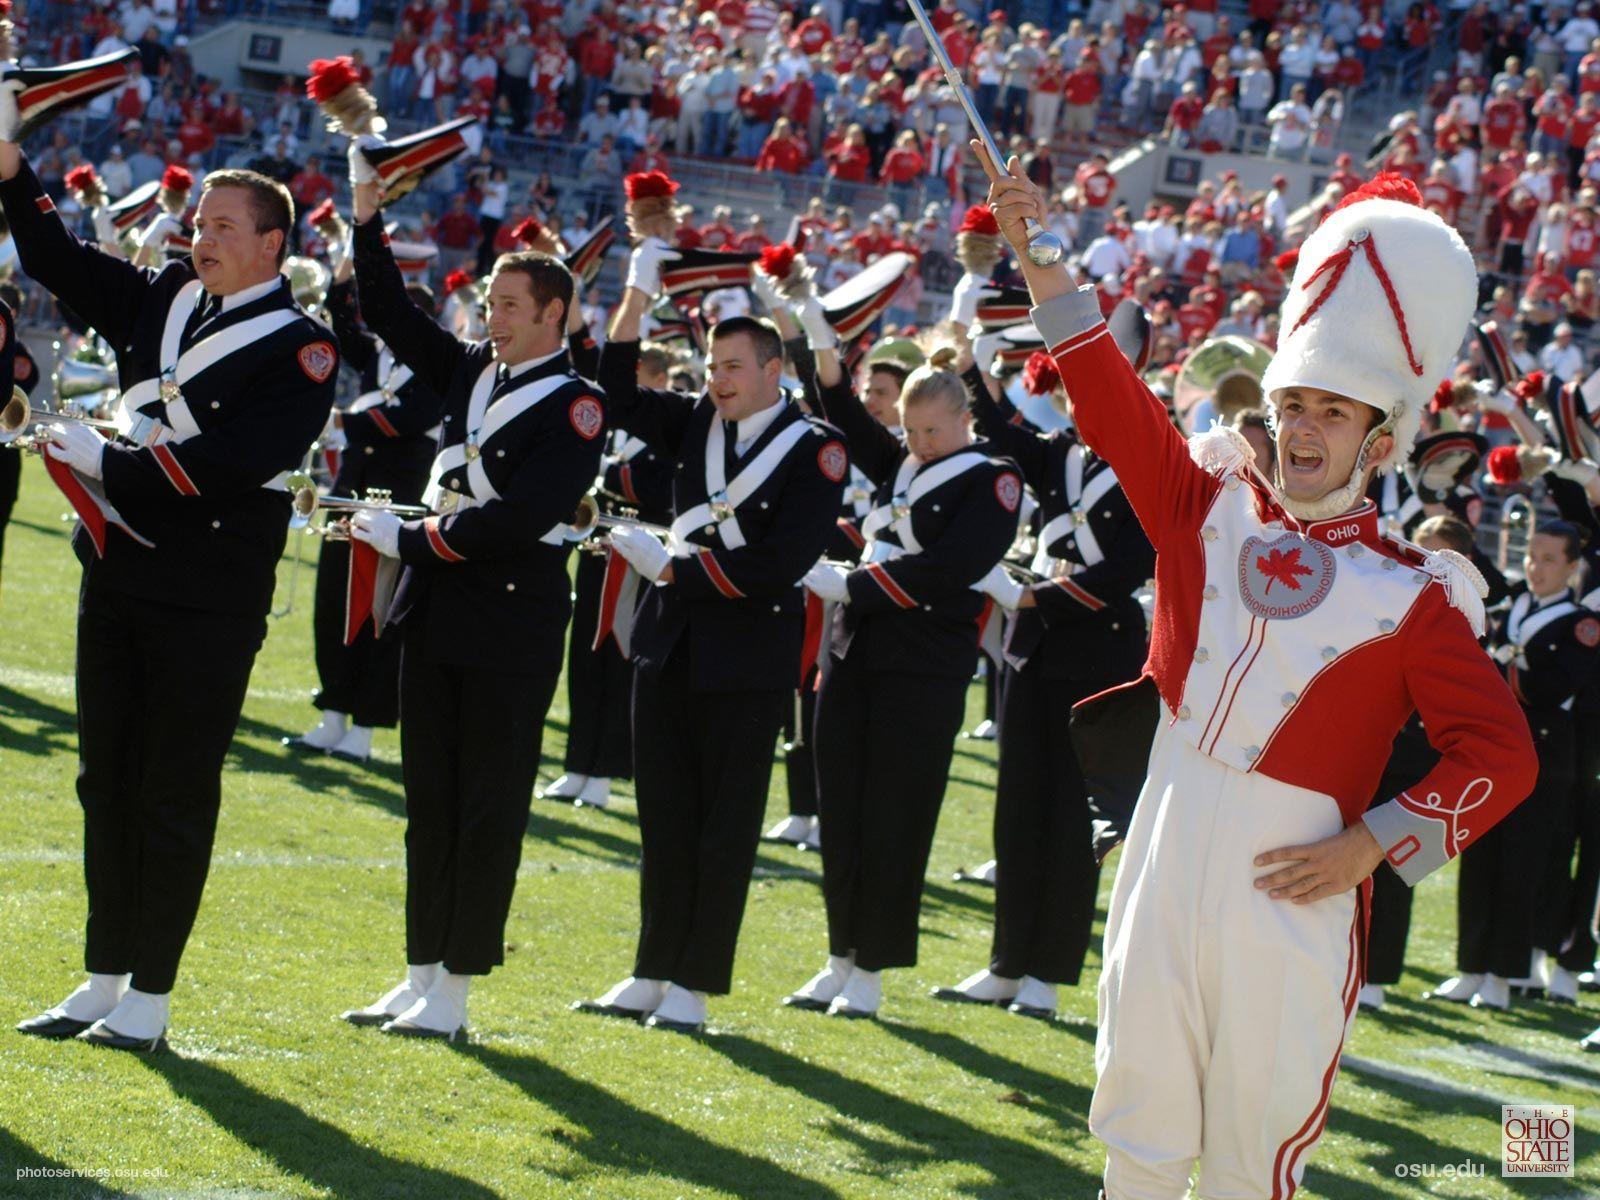 Download Marching Band Wallpapers Gallery.